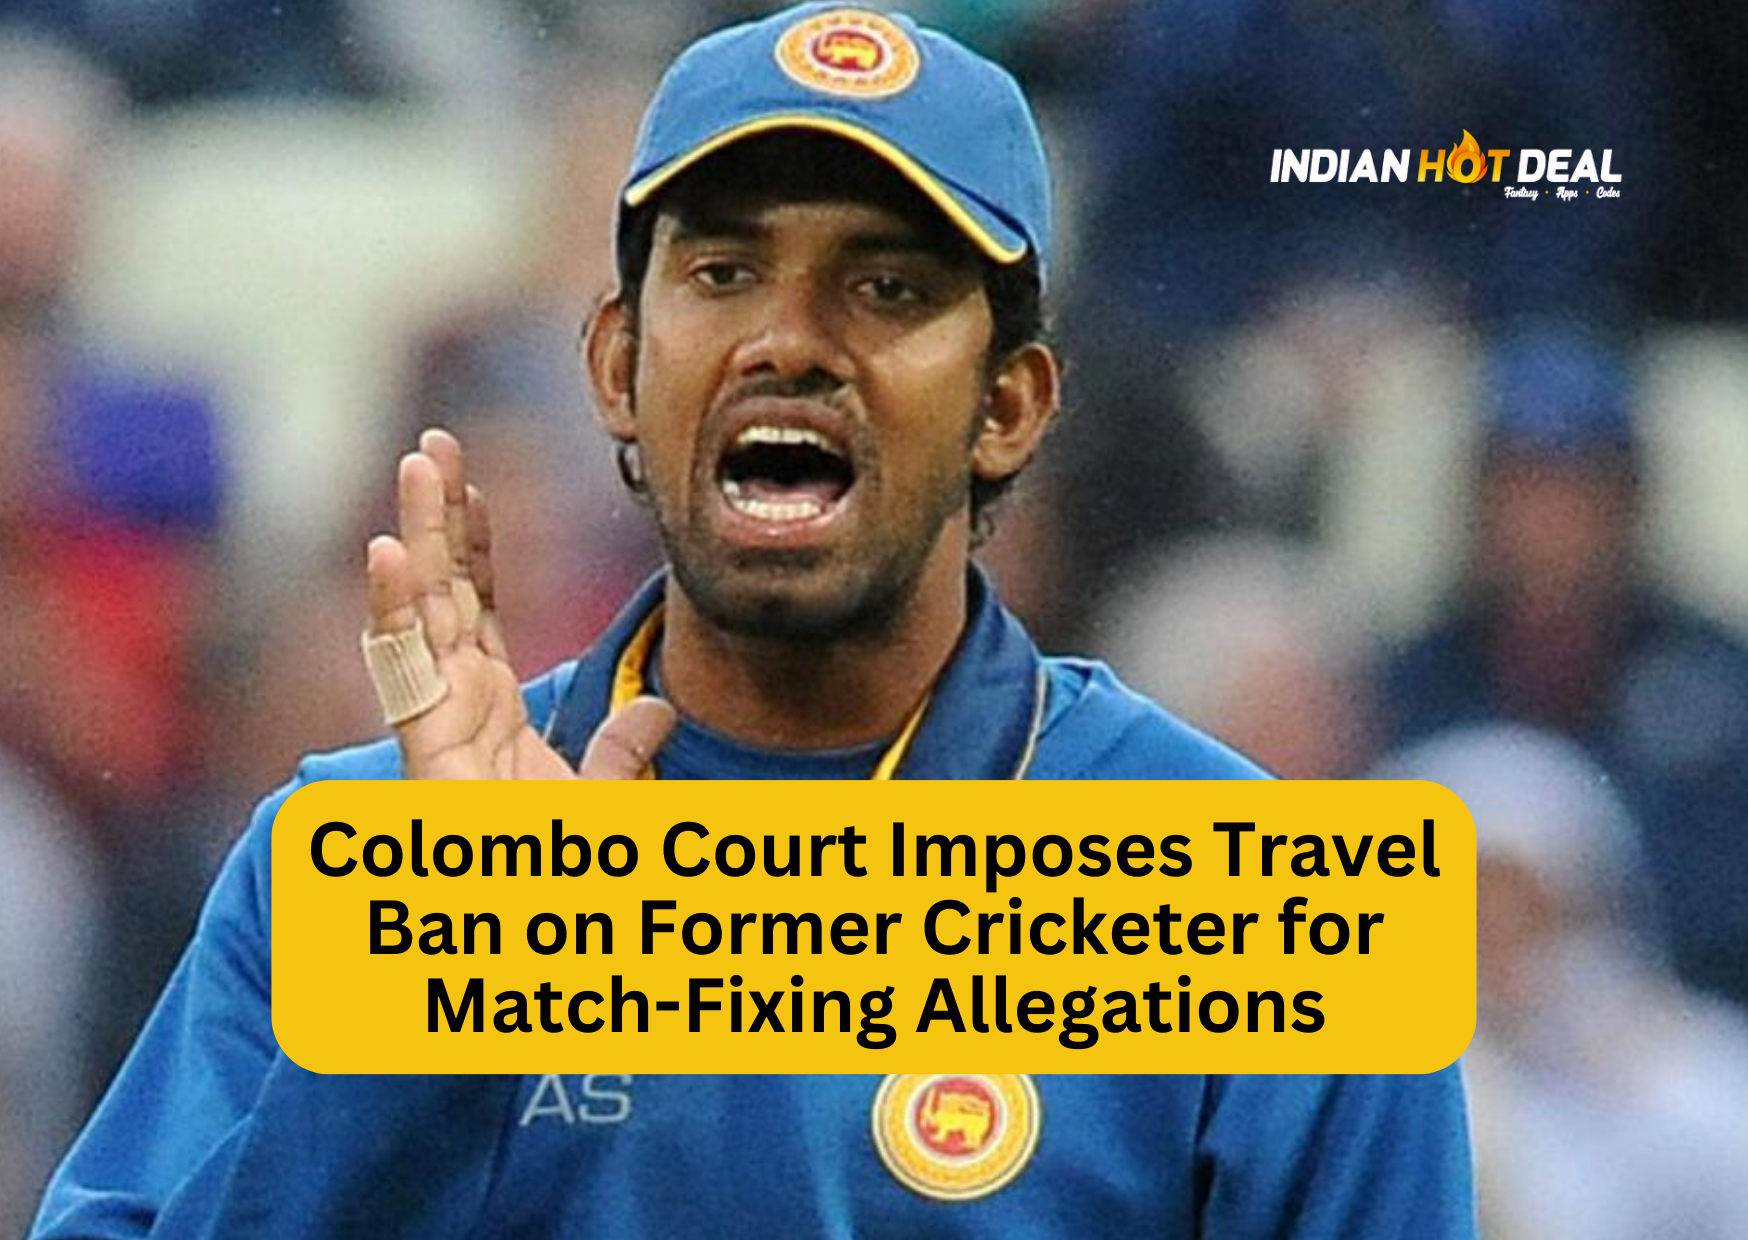 Colombo Court Imposes Travel Ban on Former Cricketer for Match-Fixing Allegations

